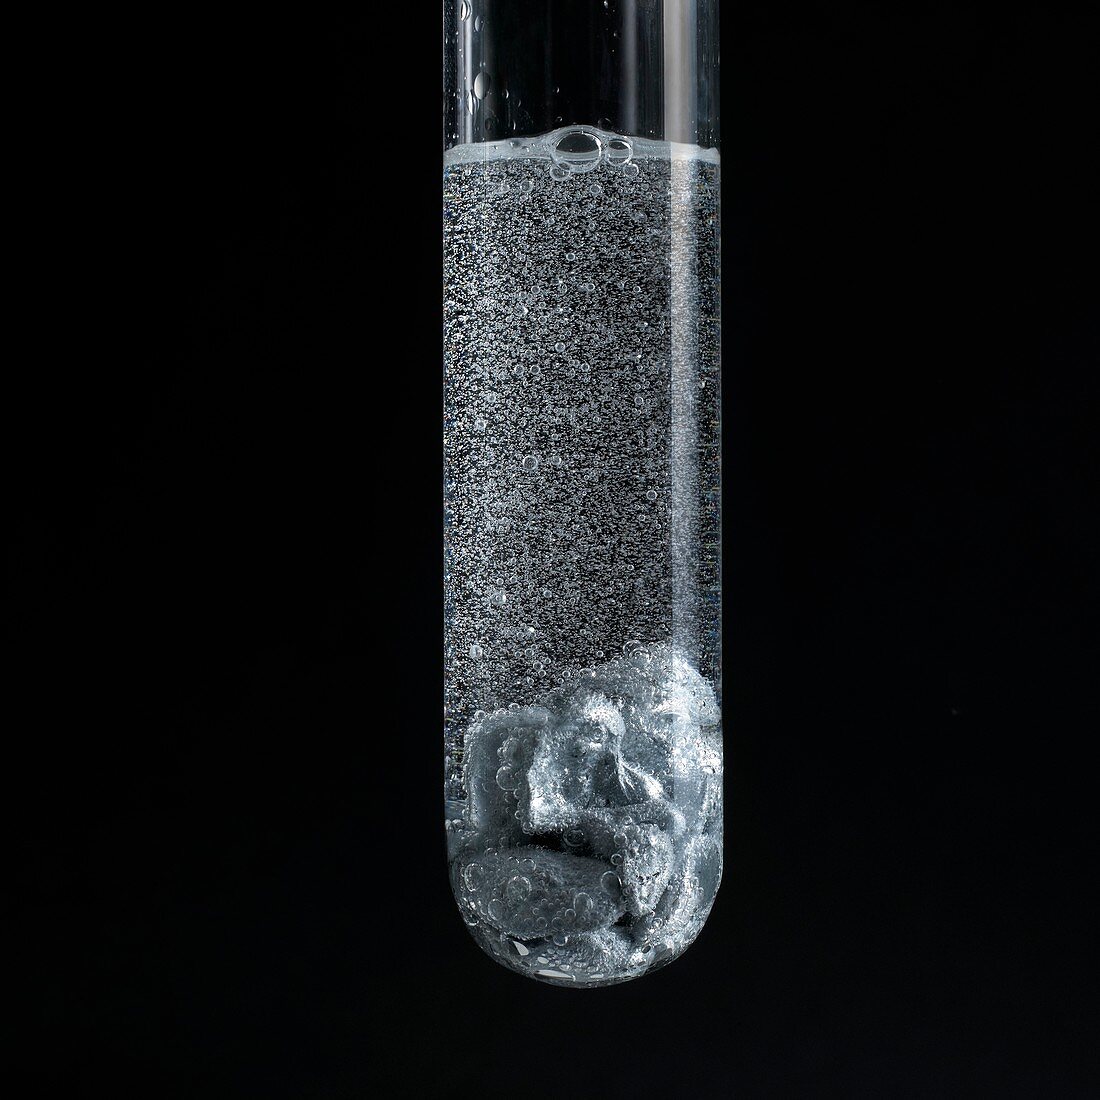 Zinc reaction with strong acid